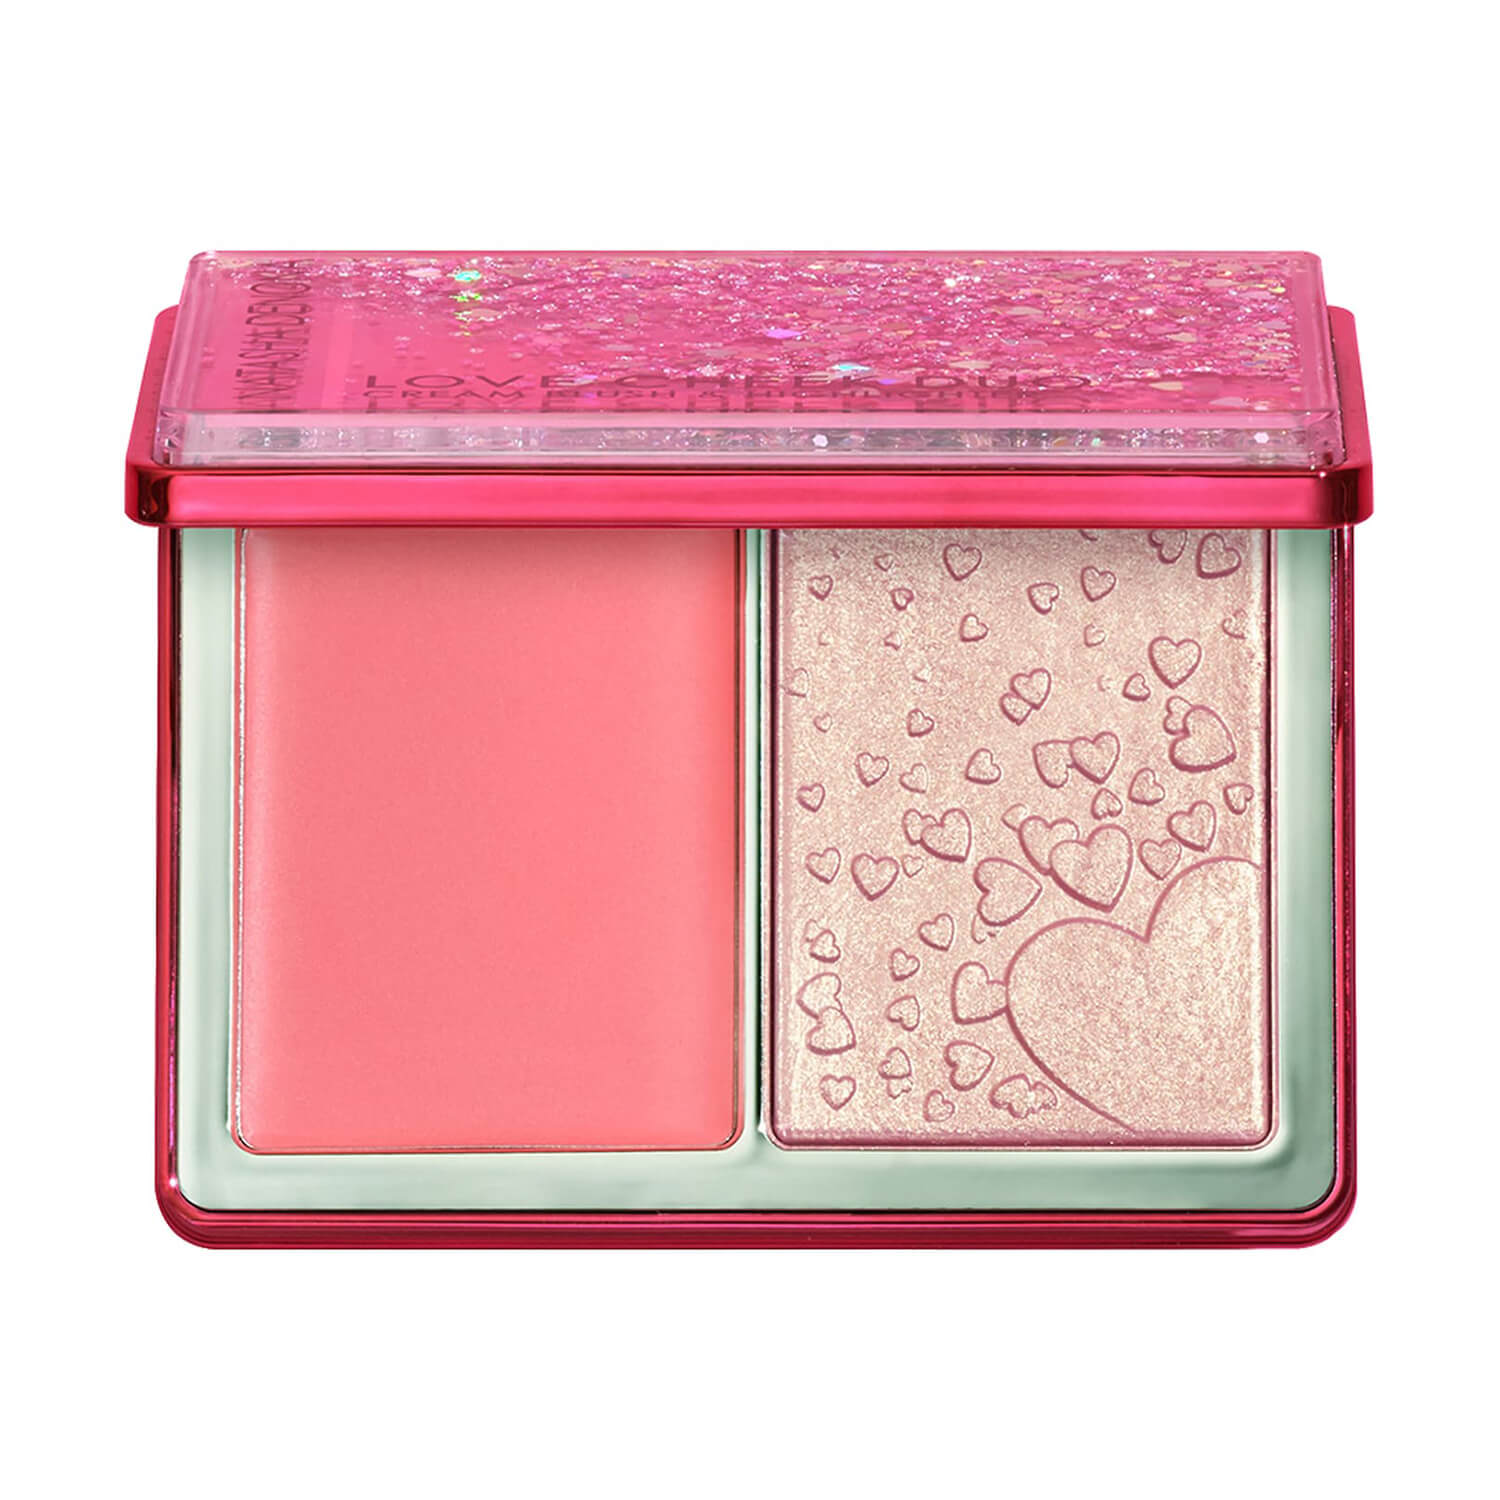 buy natasha denona cheek duo blush highlighter palette available at heygirl.pk for delivery in pakistan